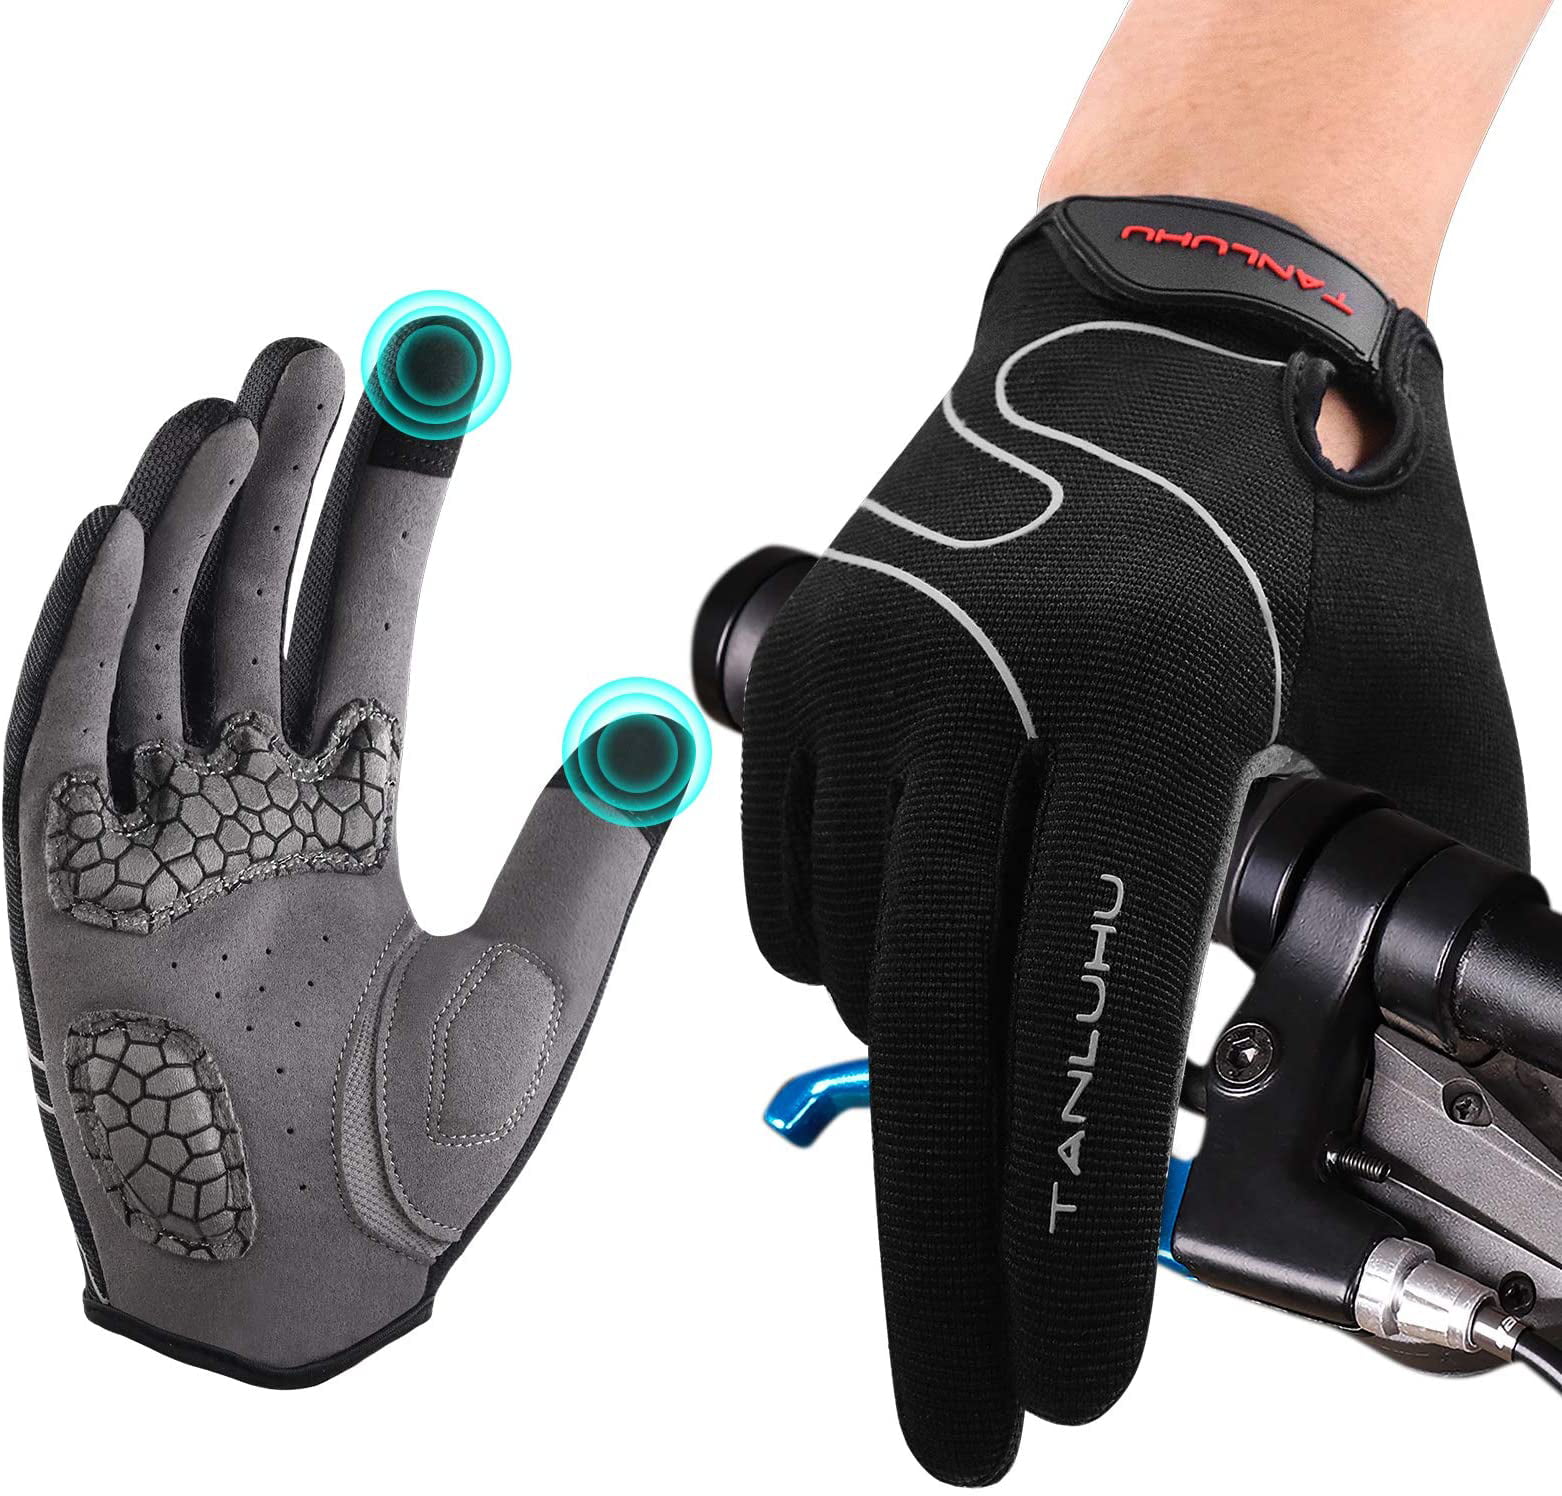 Winter Cycling Gloves for Men Women Water Resistant Touchscreen Glove Bicycle Bi 